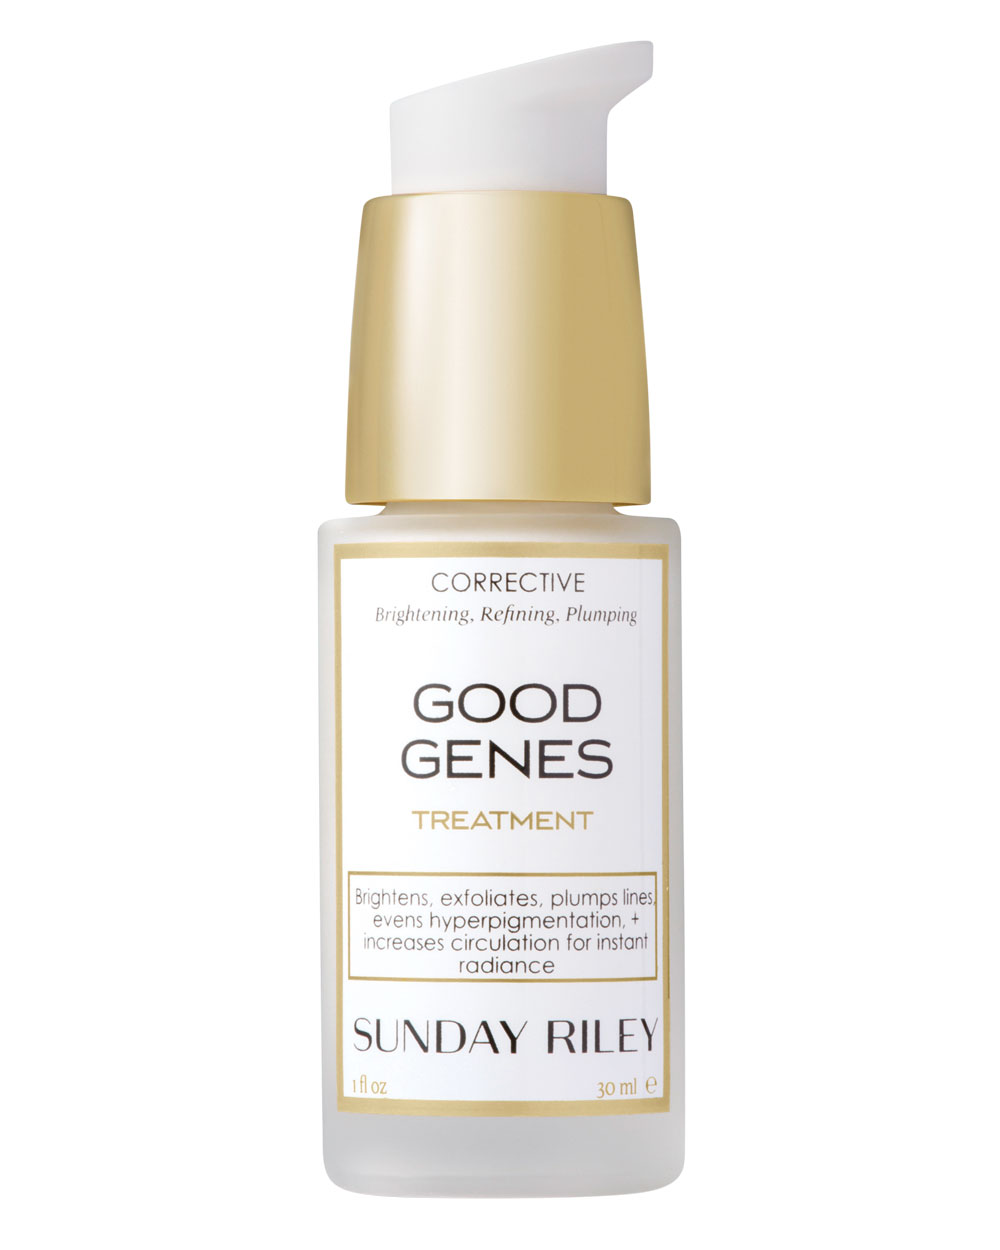 Investment piece Sunday Riley Good Genes All-In-One Lactic Acid Treatment, $166, from Mecca Cosmetica